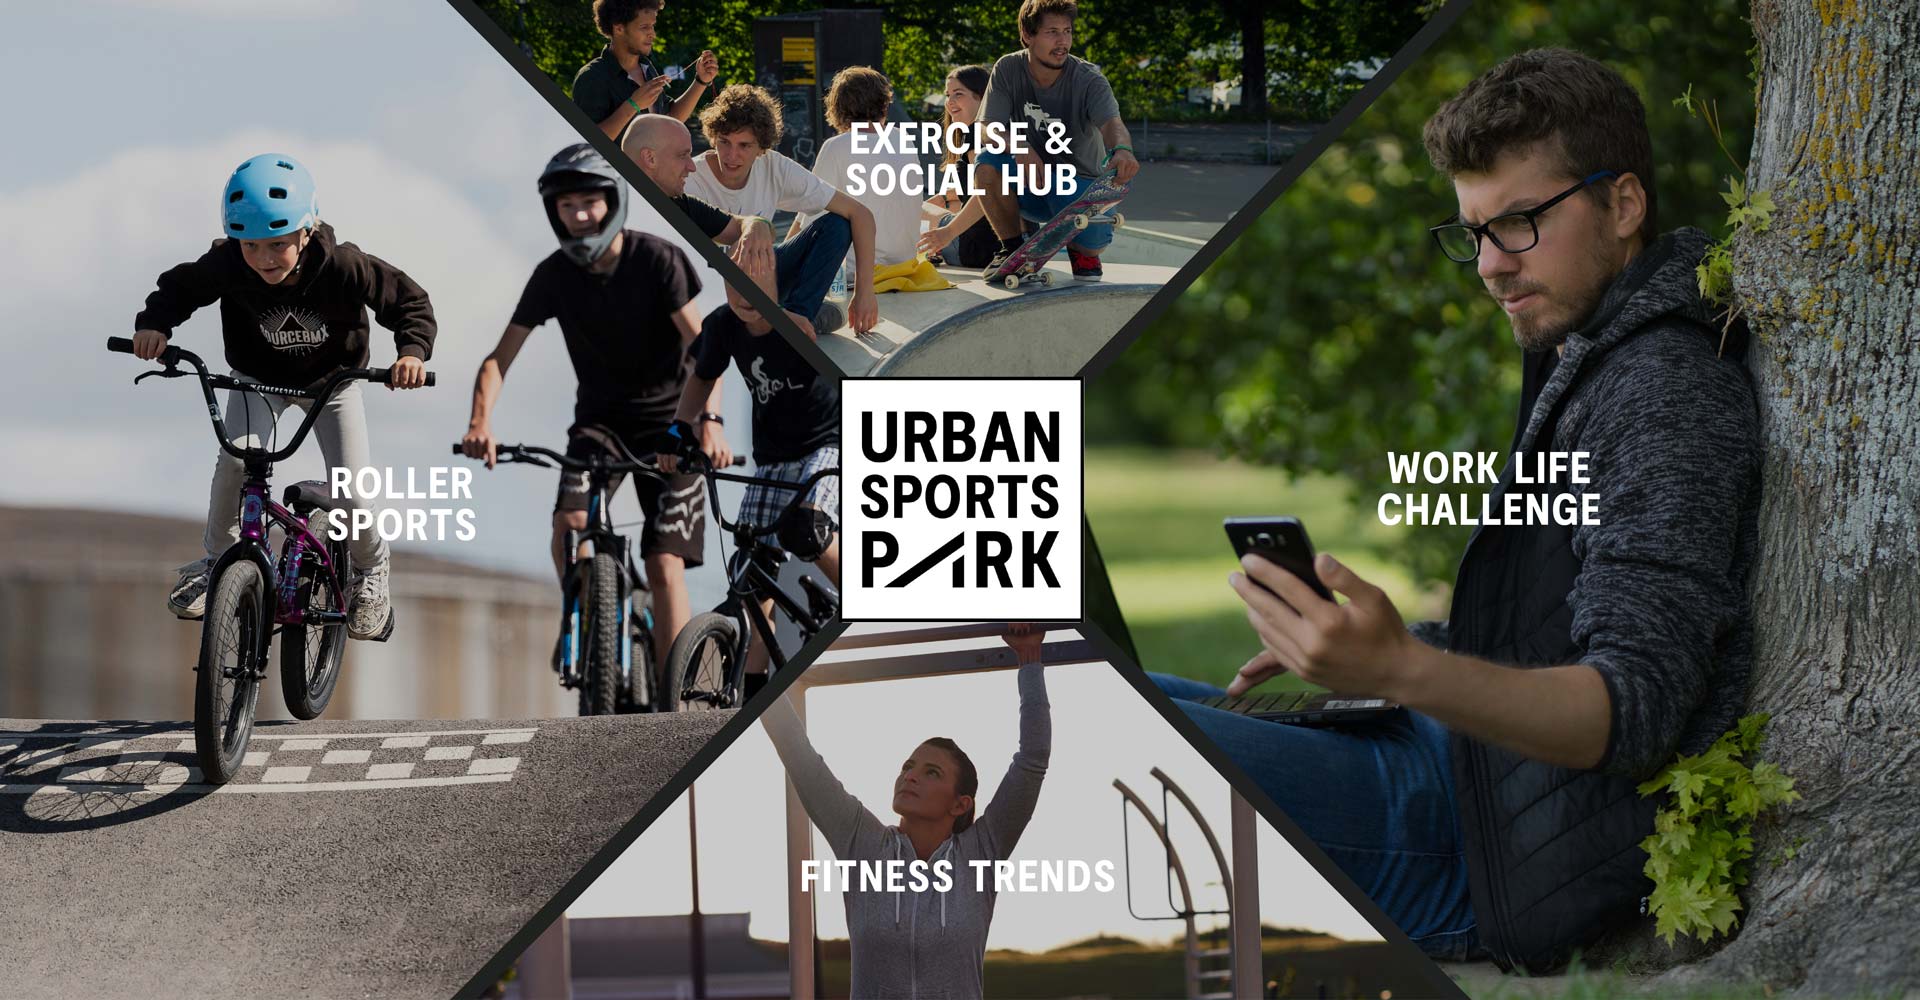 Key areas of the Urban Sports Park